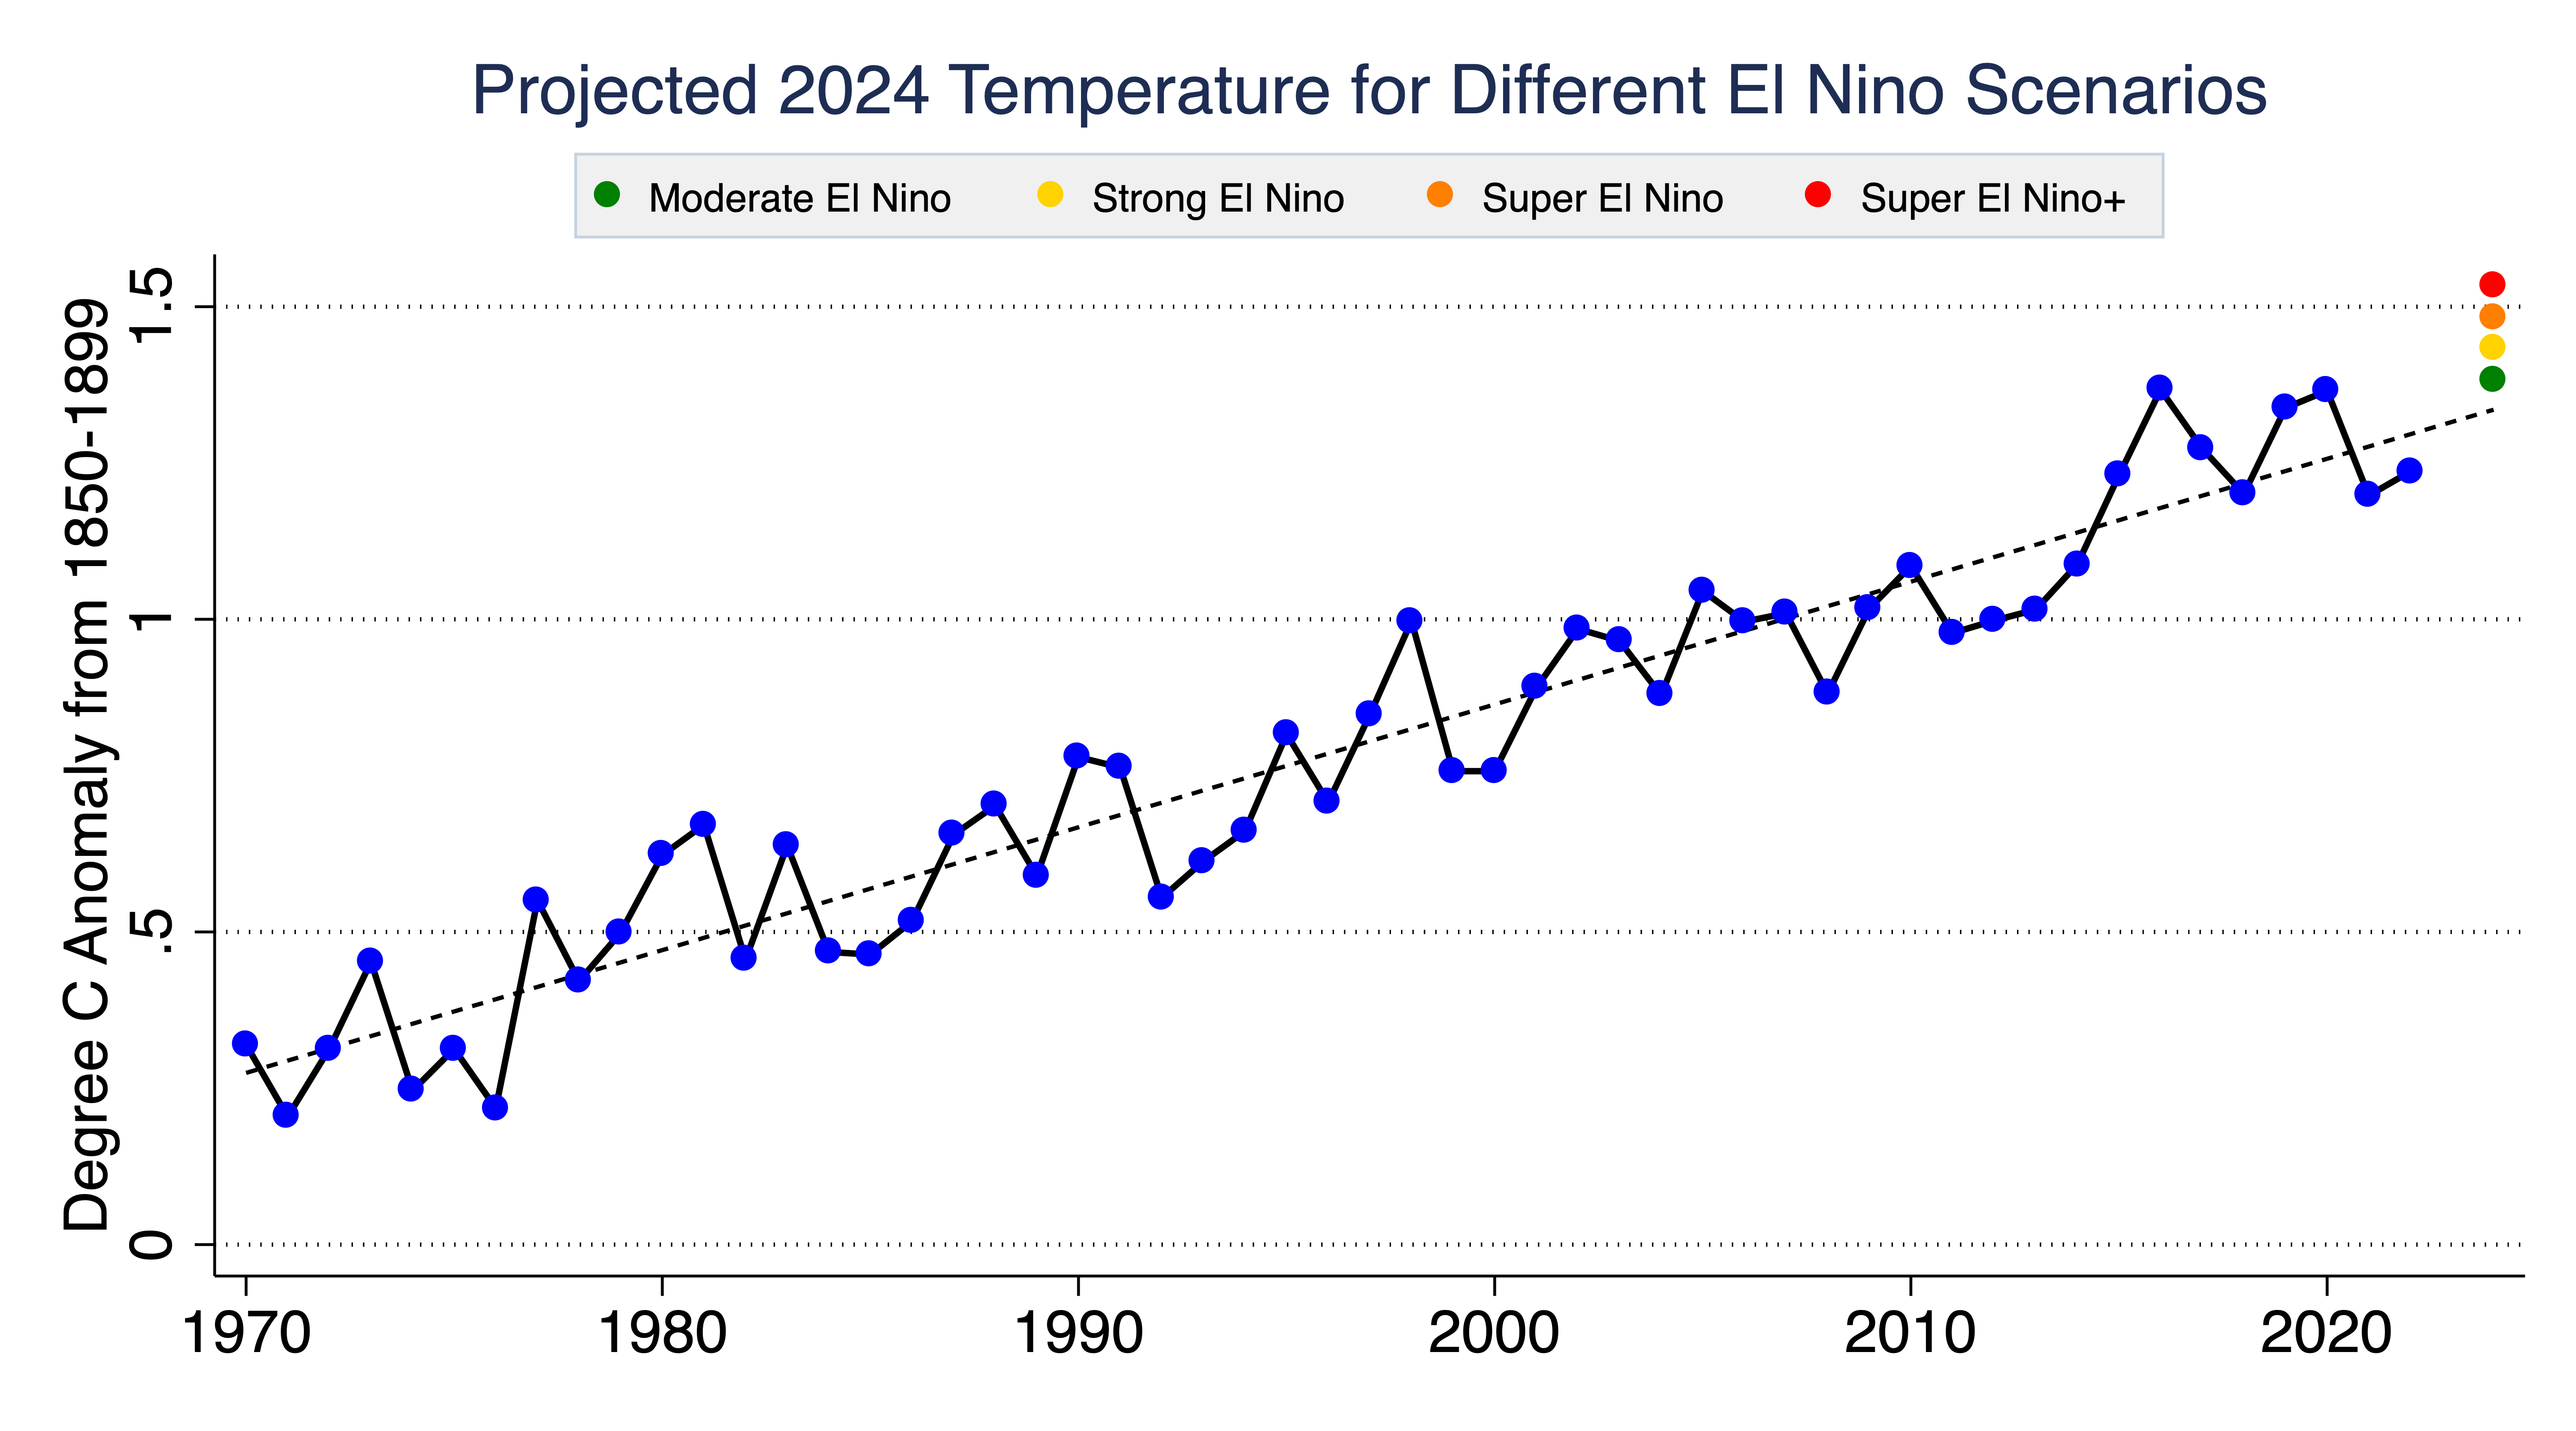 Will global temperatures exceed 1.5C in 2024?